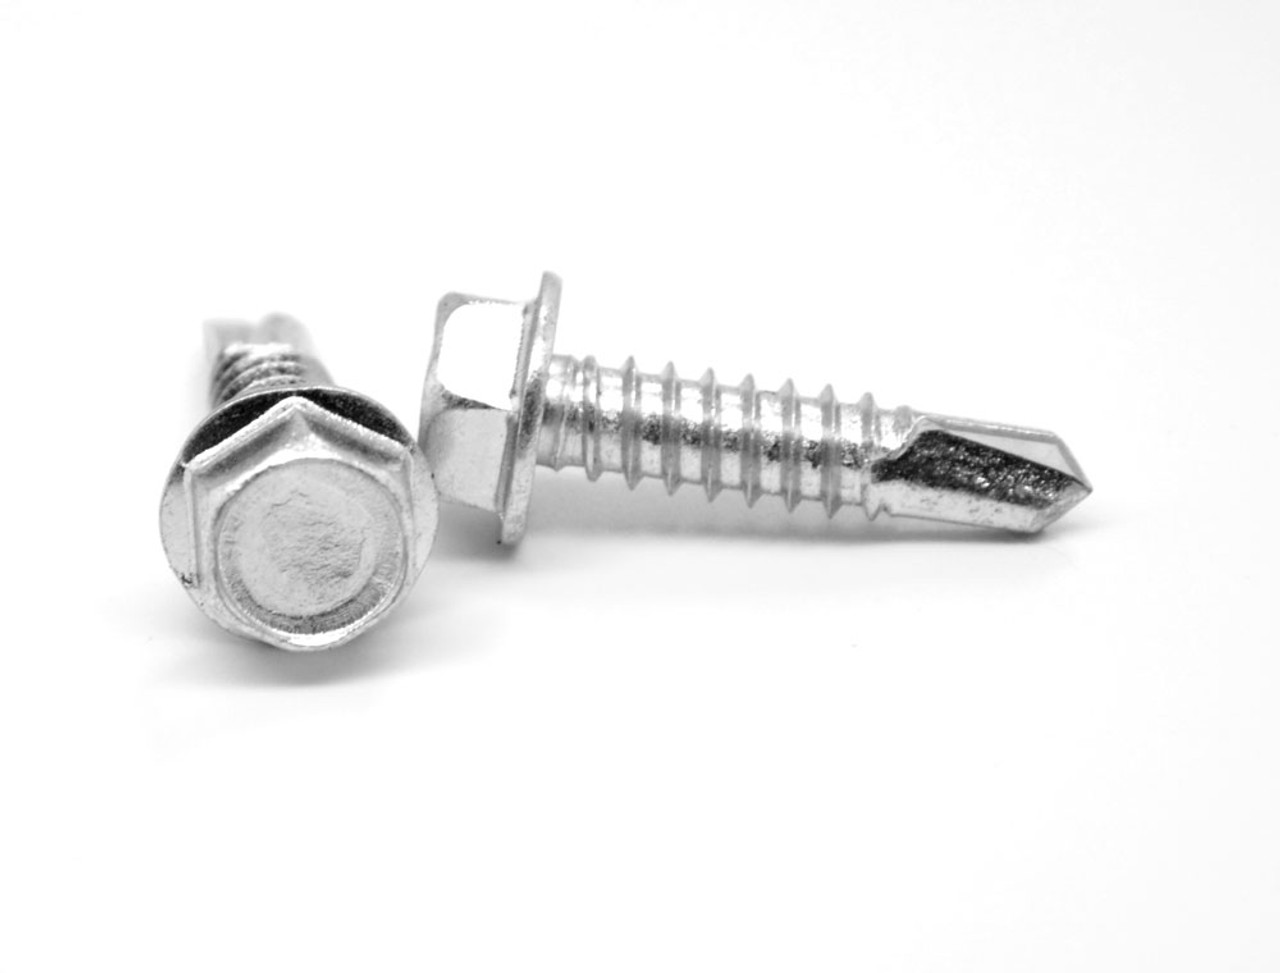 1/4-20 x 4 Coarse Thread Self Drilling Screw Hex Washer Head #3 Point Low Carbon Steel Zinc Plated